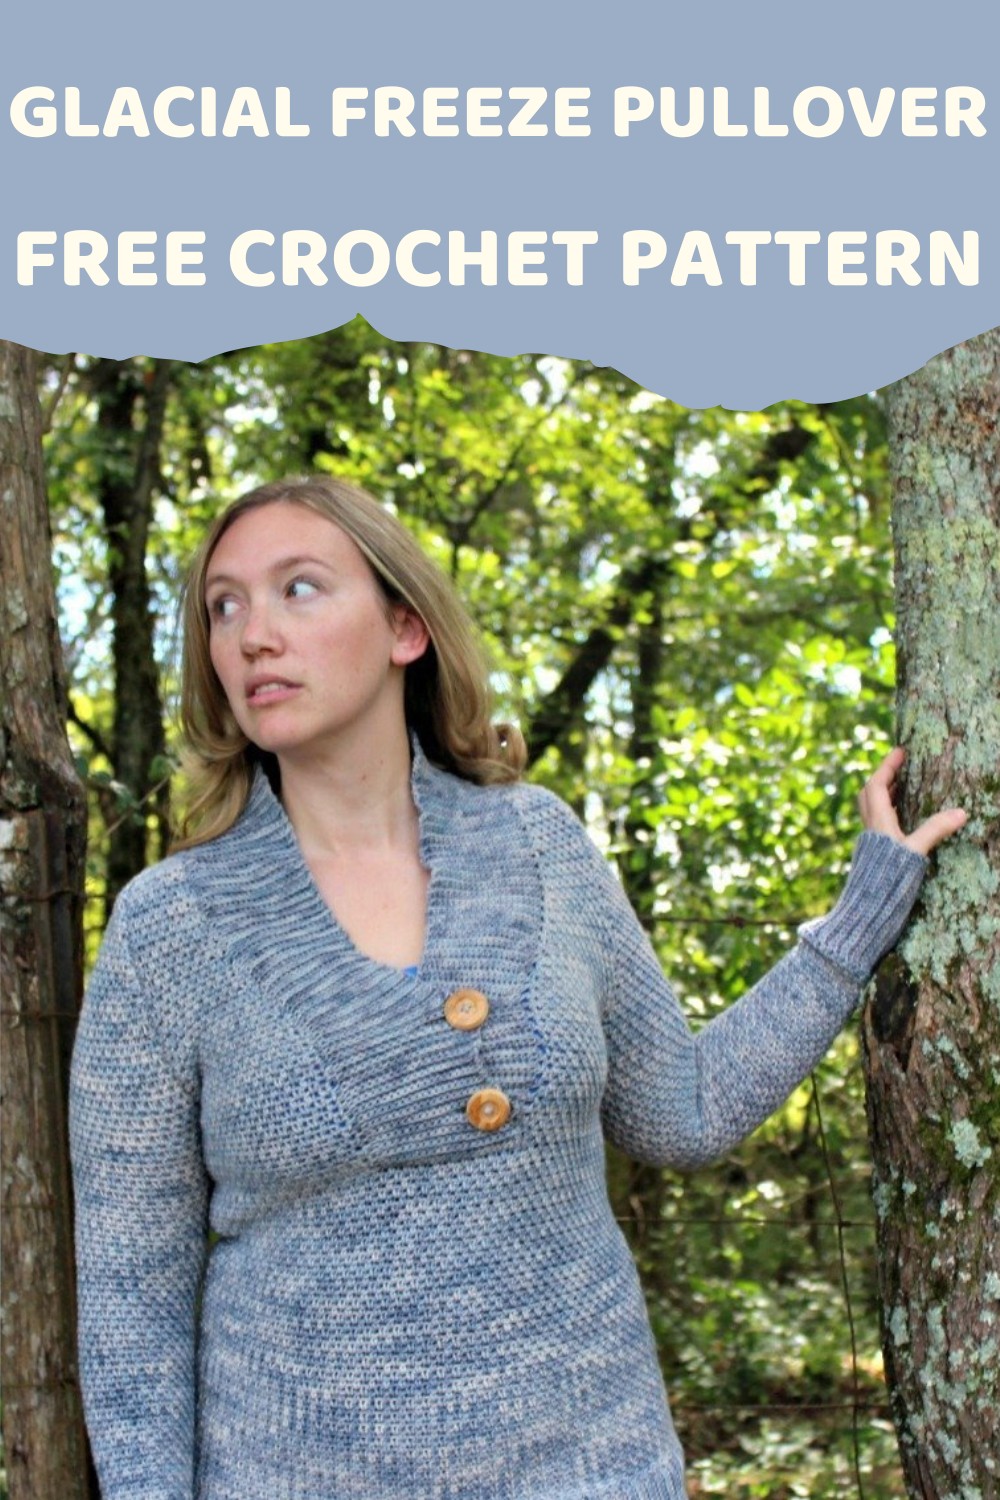 Glacial Freeze Pullover Free Crochet Pattern